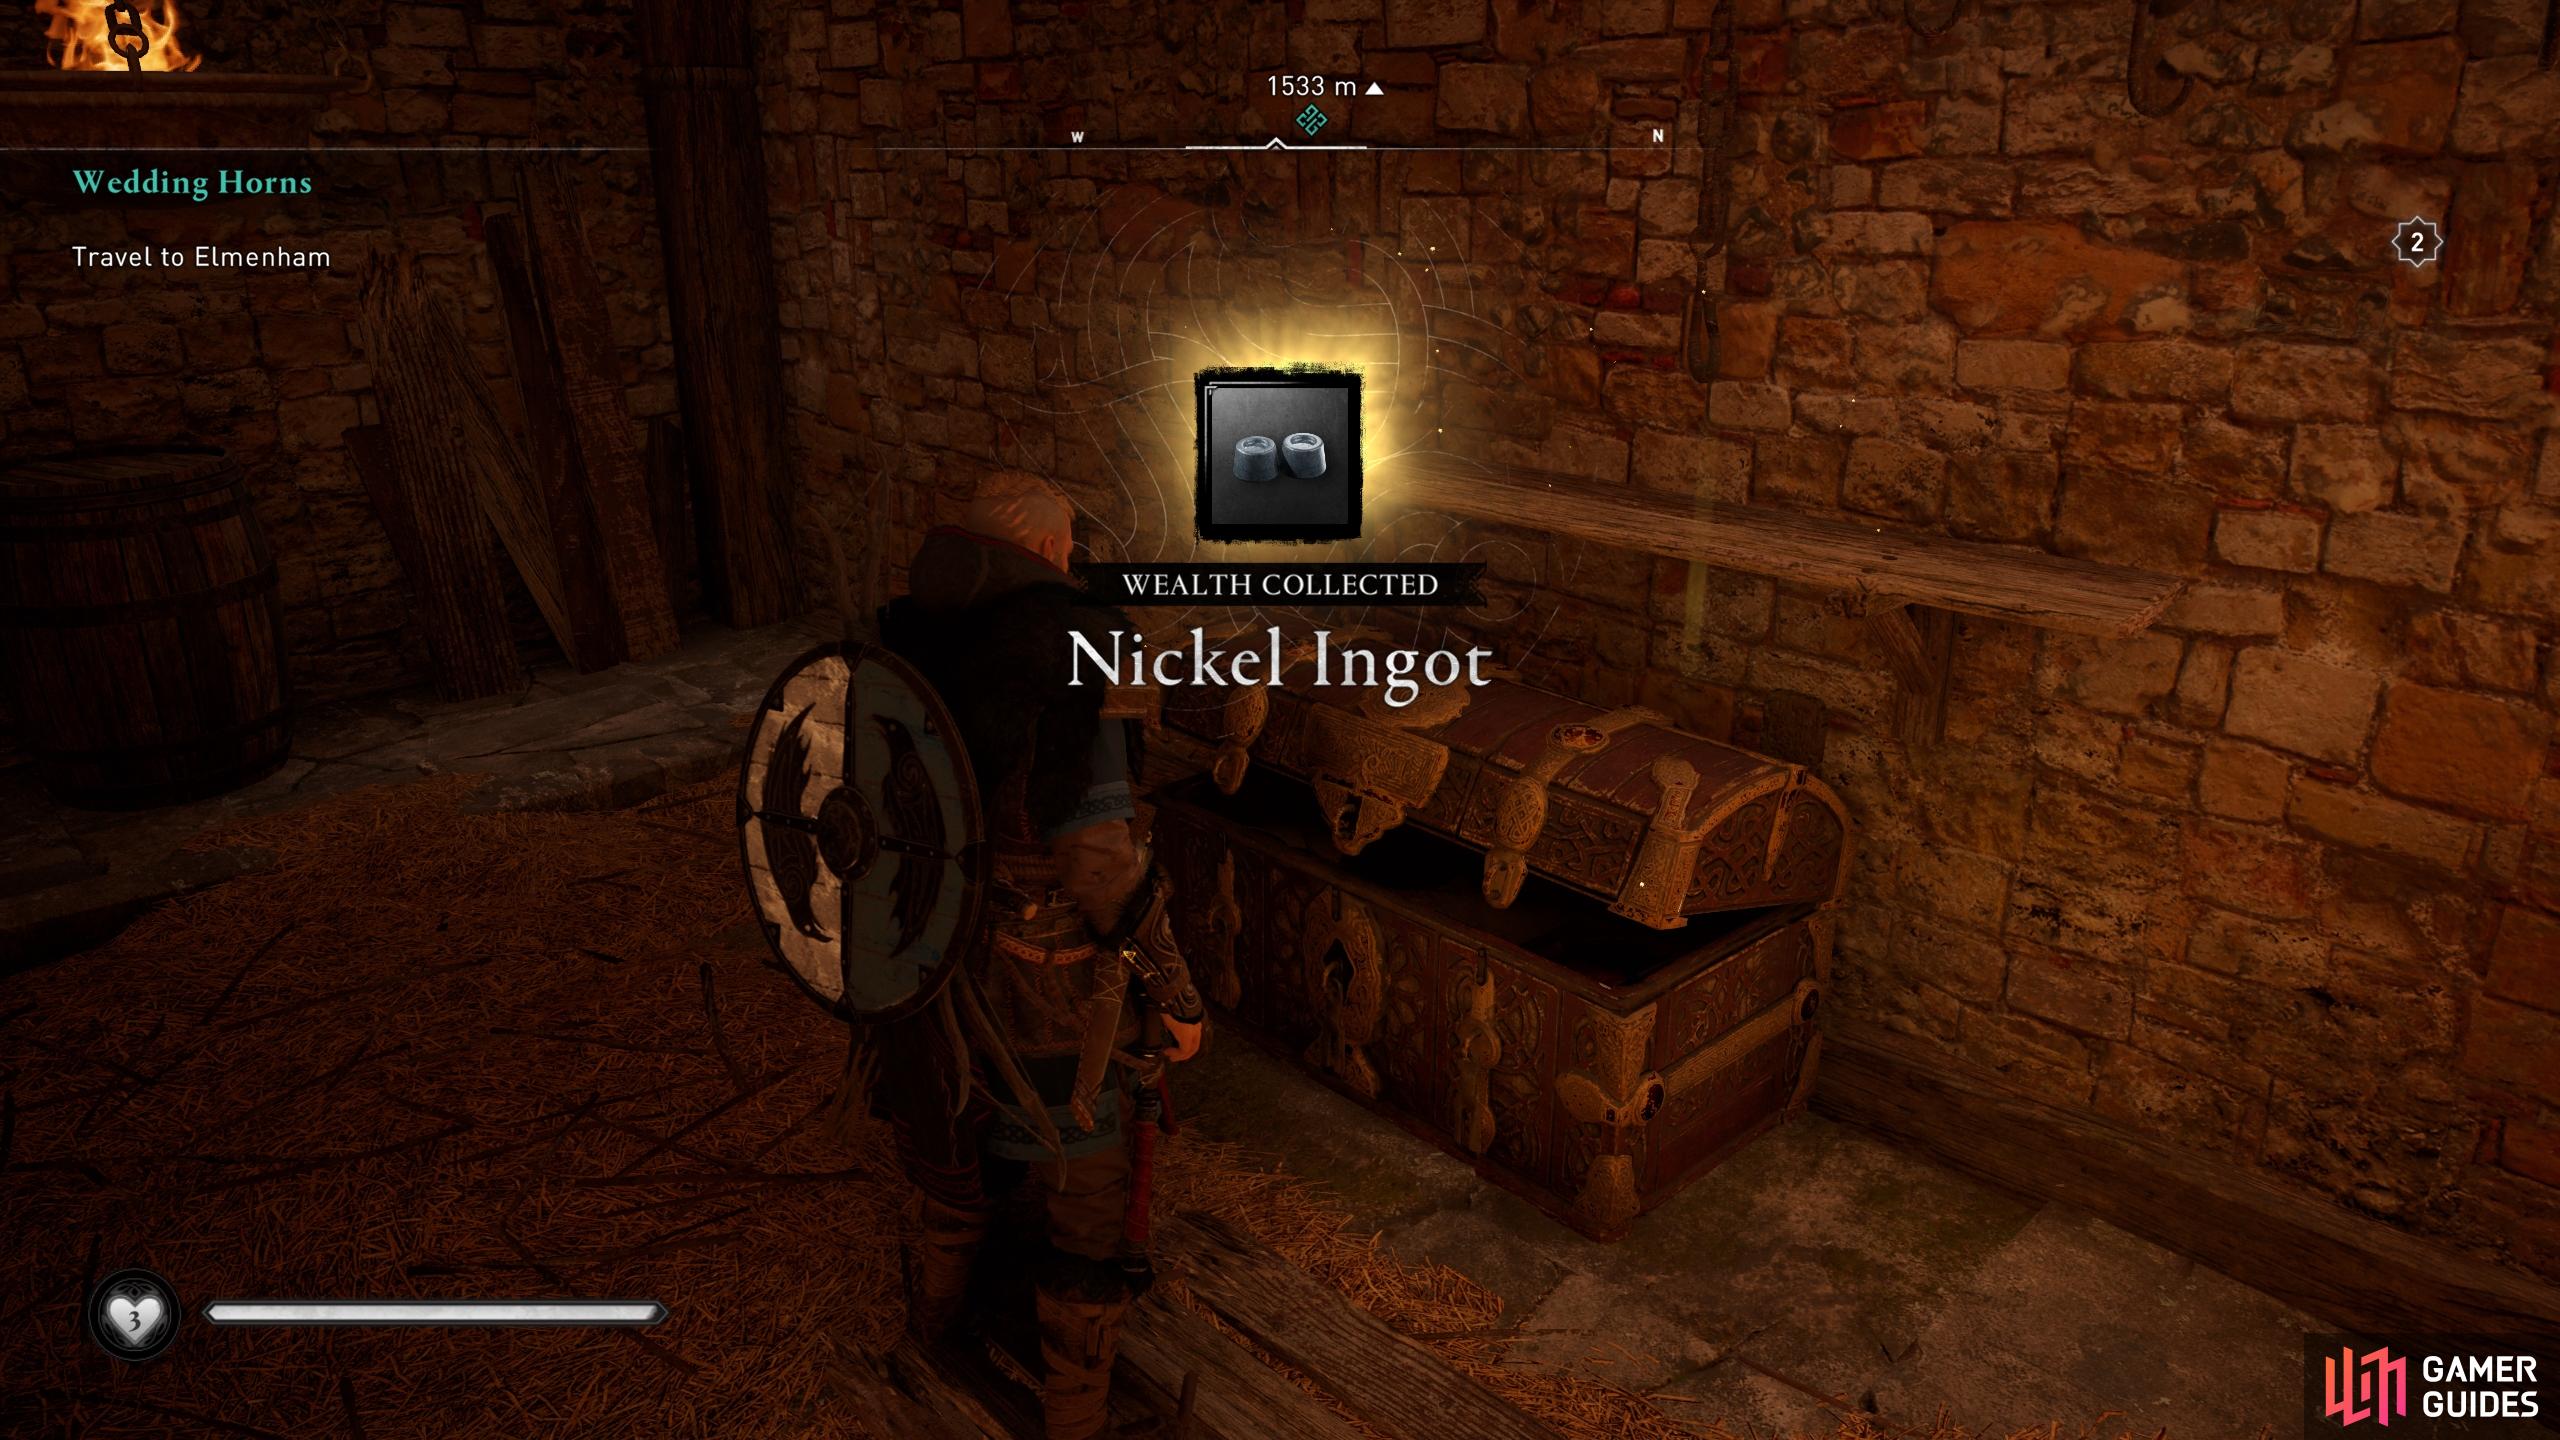 Loot the chest for the Nickel Ingot.